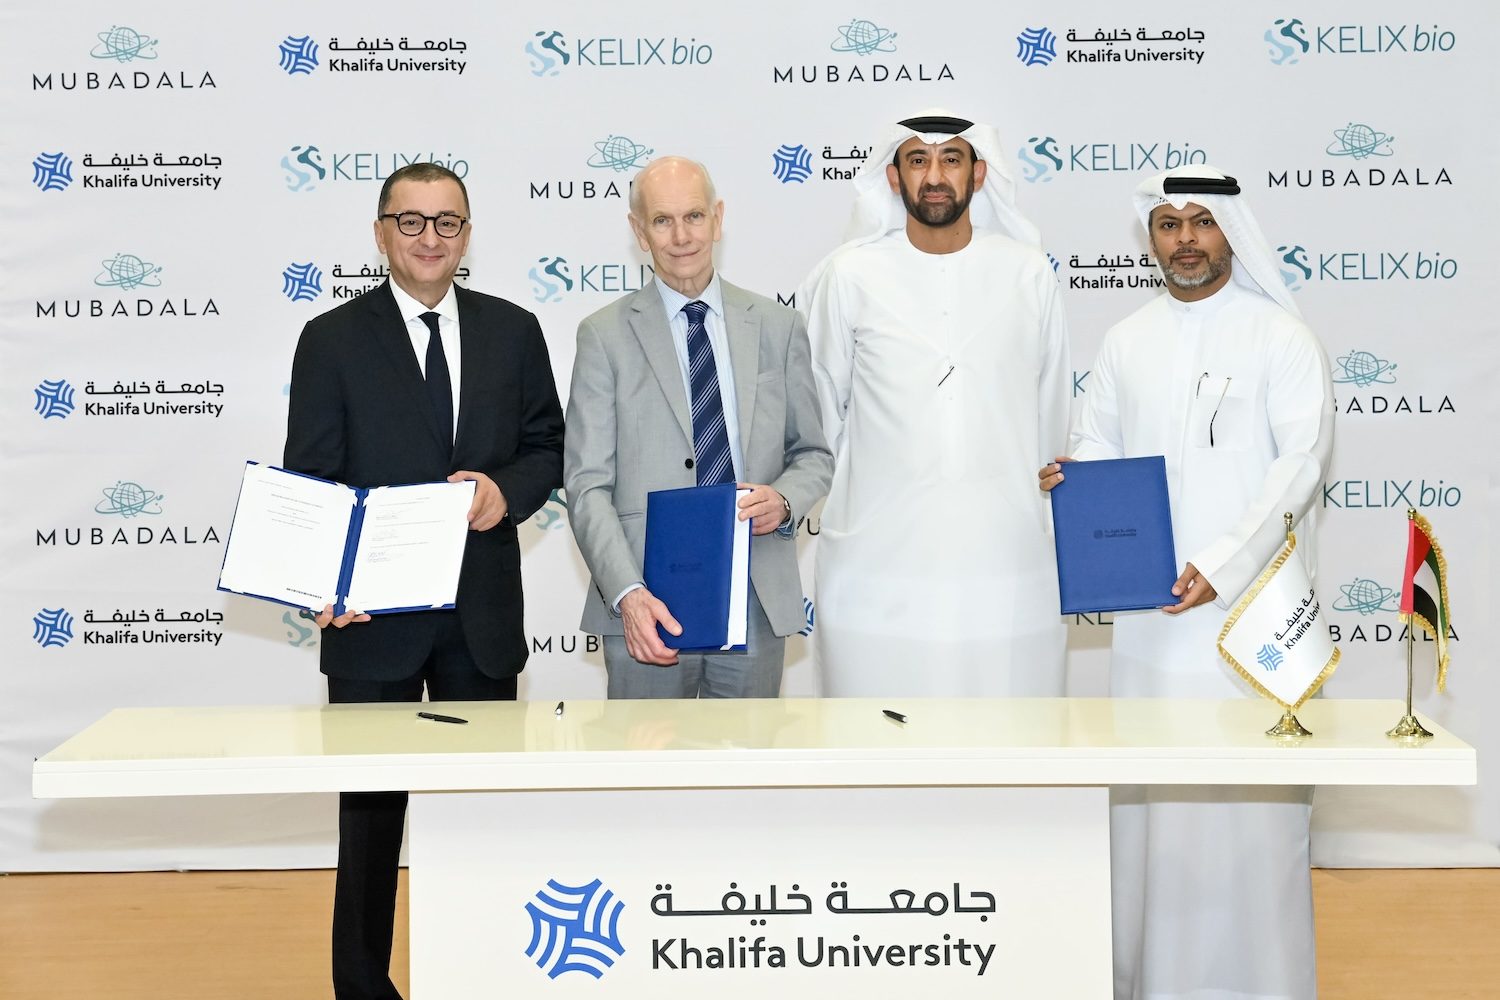 Abu Dhabi's Khalifa University of Science and Technology, Mubadala Investment Company and Kelix Bio announce plans to collaborate on R&D into biopharmaceutical technologies